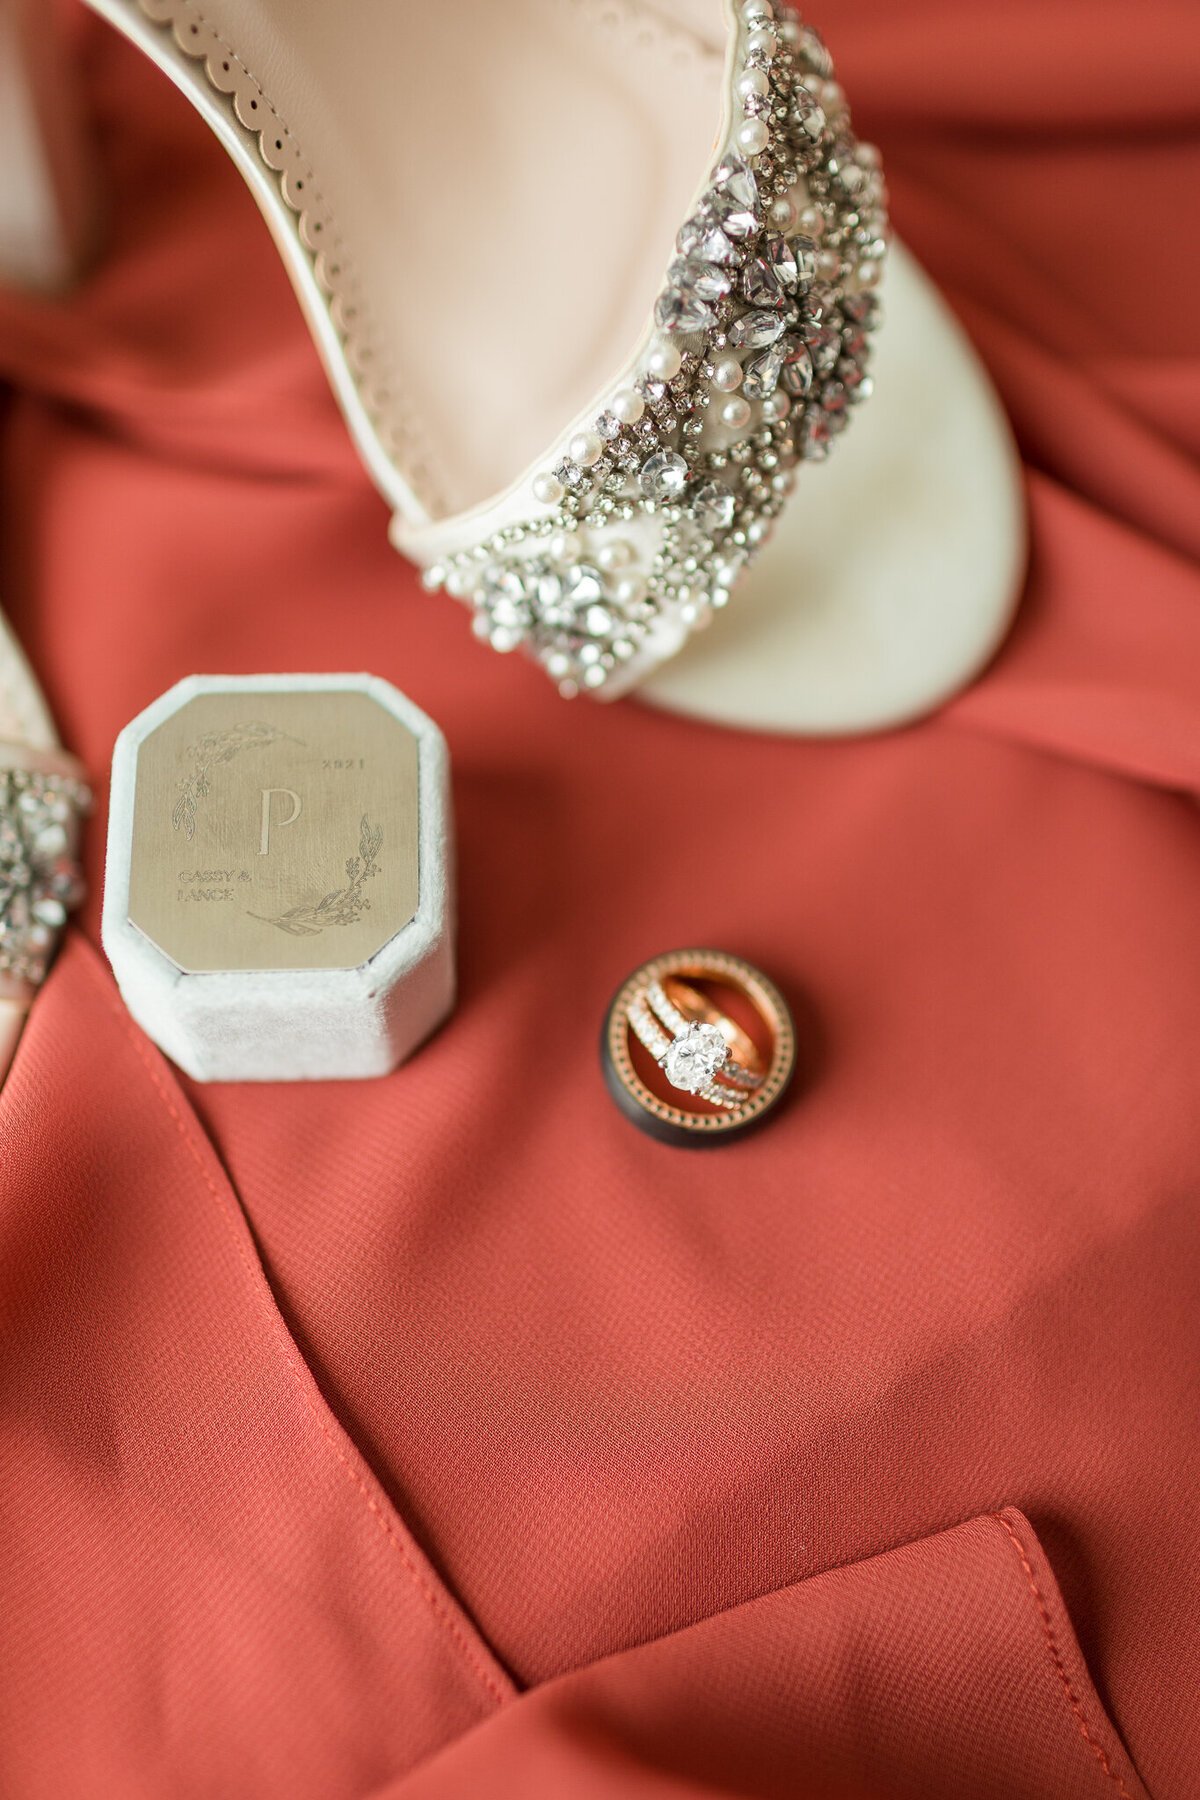 FLAT LAY CLOSE UP SHOT OF BADGLEY MISCHKA BRIDAL SHOES AND A PERSONALIZED DUSTY BLUE RING NBOX WITH A N OVAL CUT ROSE GOLD WEDDING RING SET